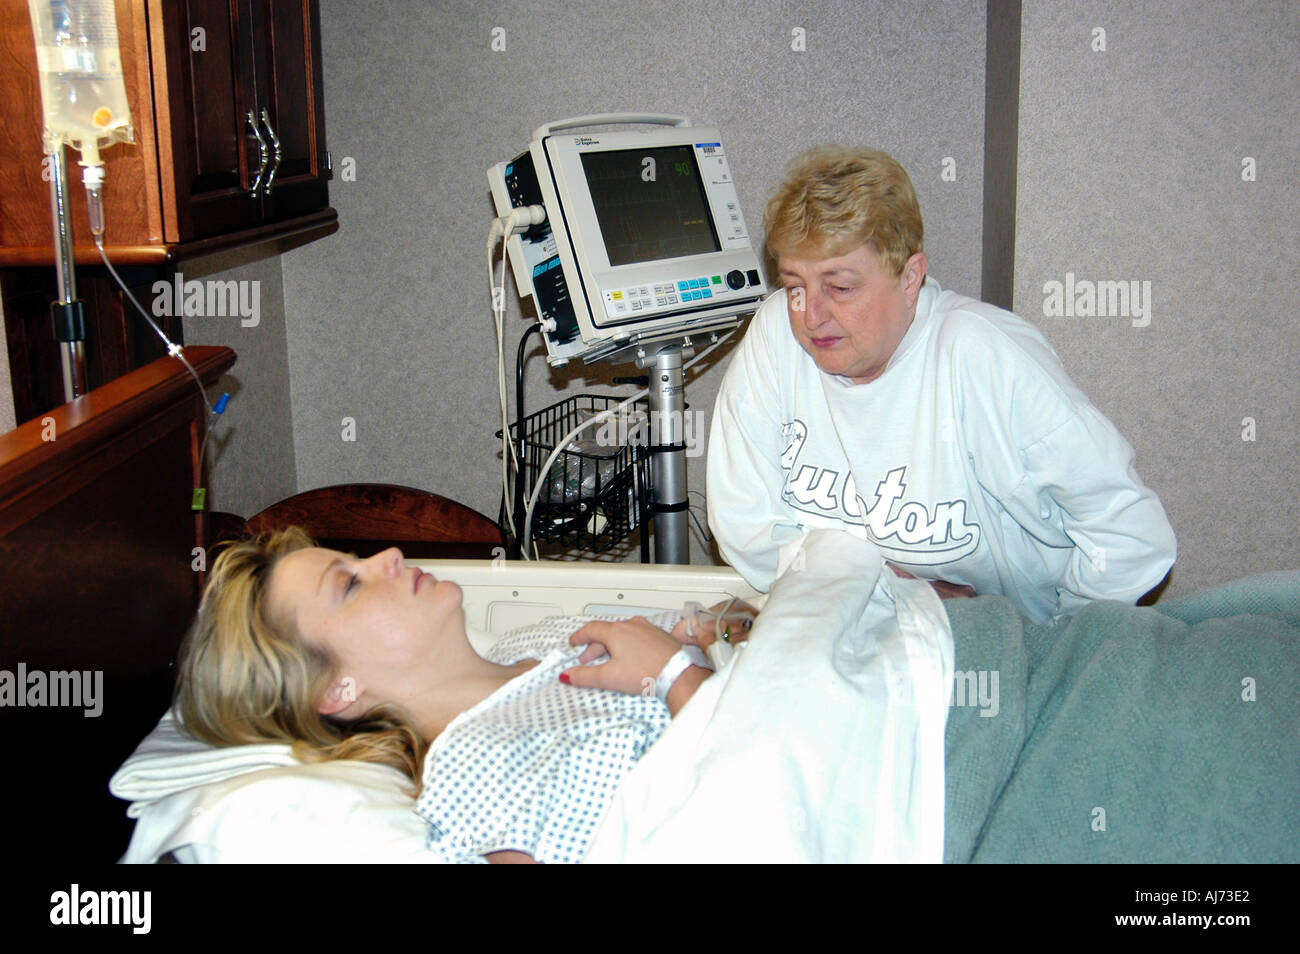 Female Recovers in Hospital After Birth of Child Stock Photo